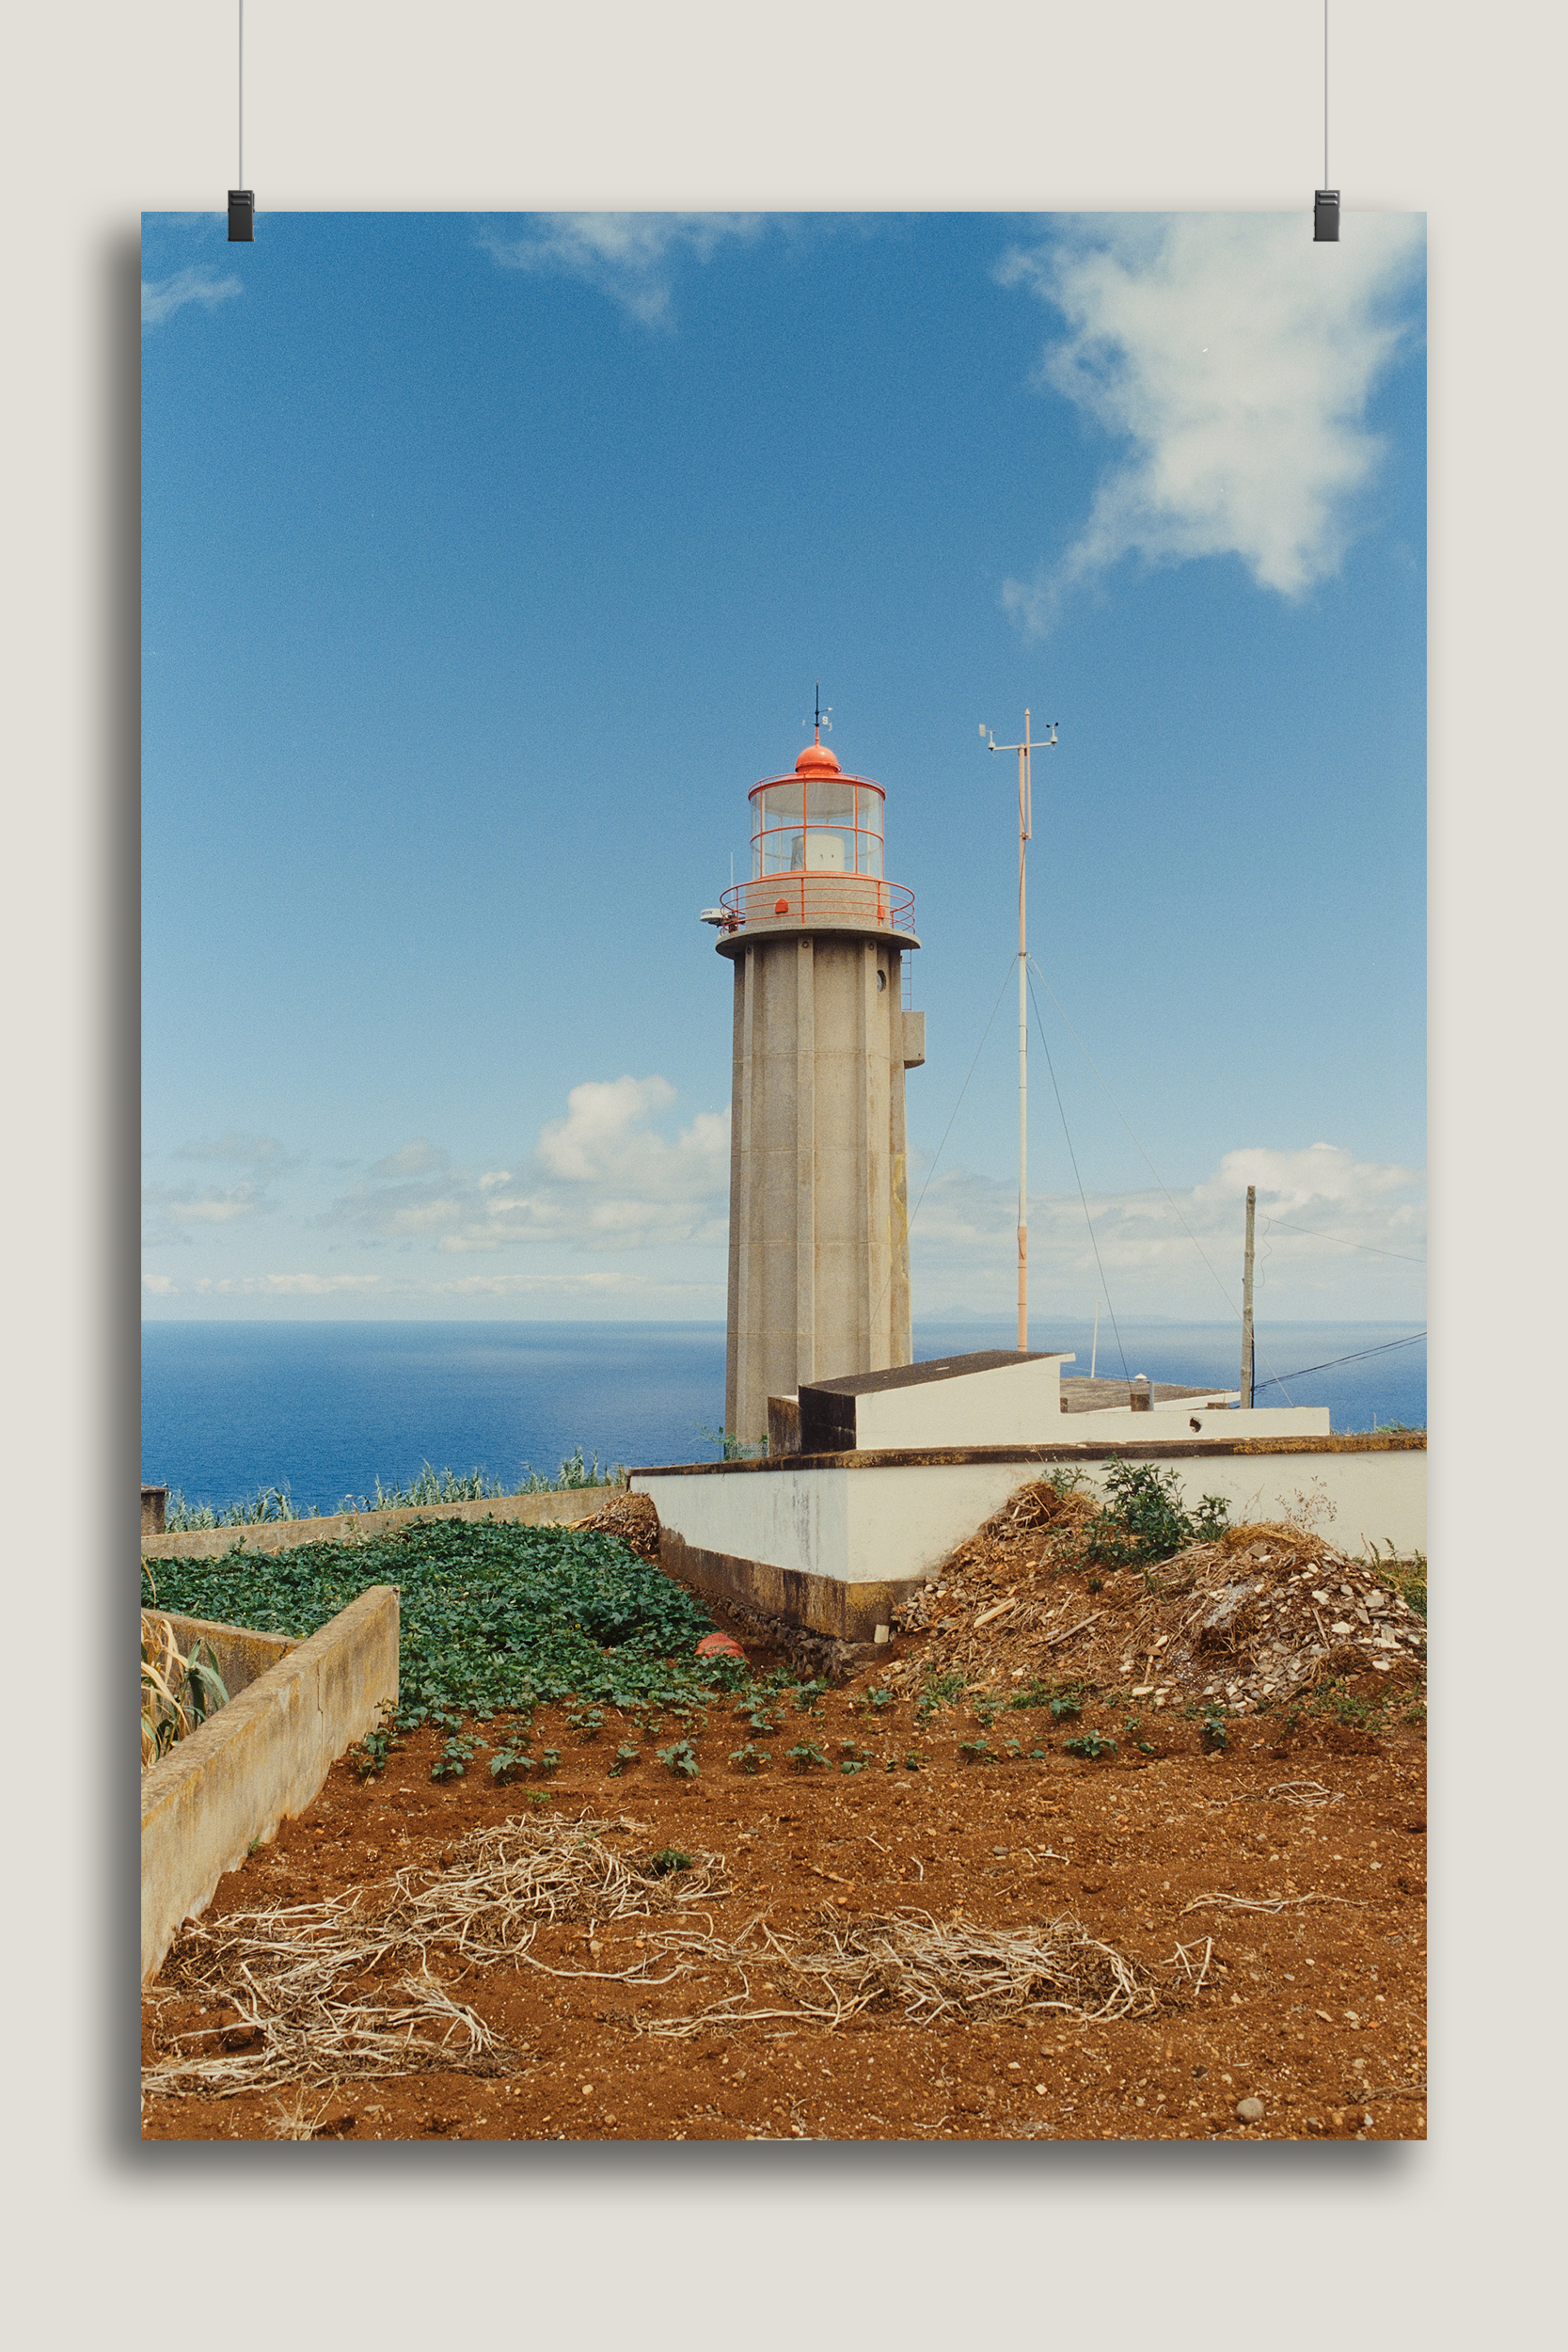 fine art print of a lighthouse in the style of wes anderson photographed on madeira island